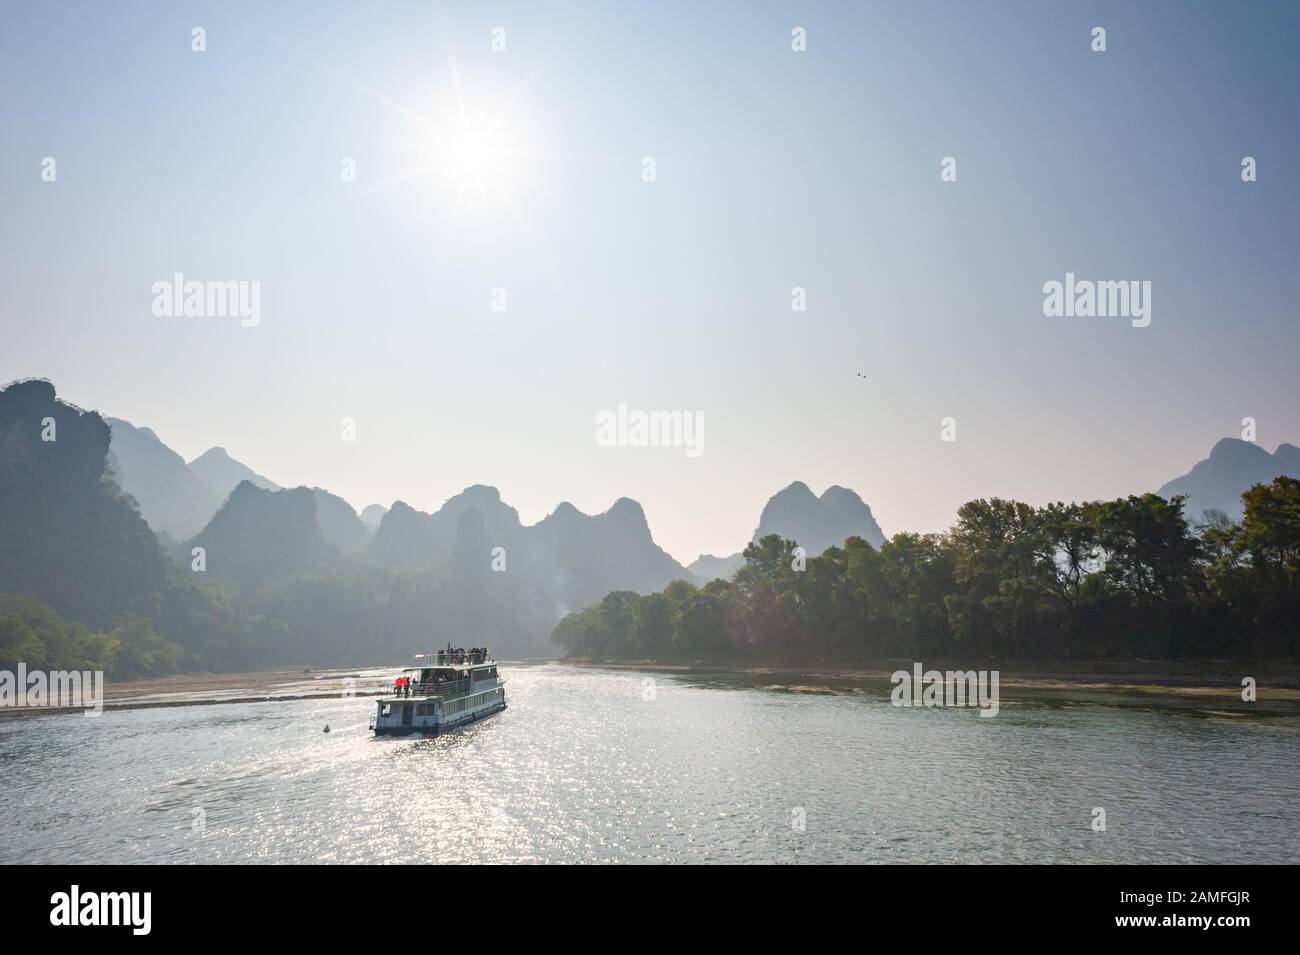 Boat on Li river cruise against the sun and karst formation mountain landscape in the fog between Guiling and Yangshuo, Guangxi province, China Stock Photo